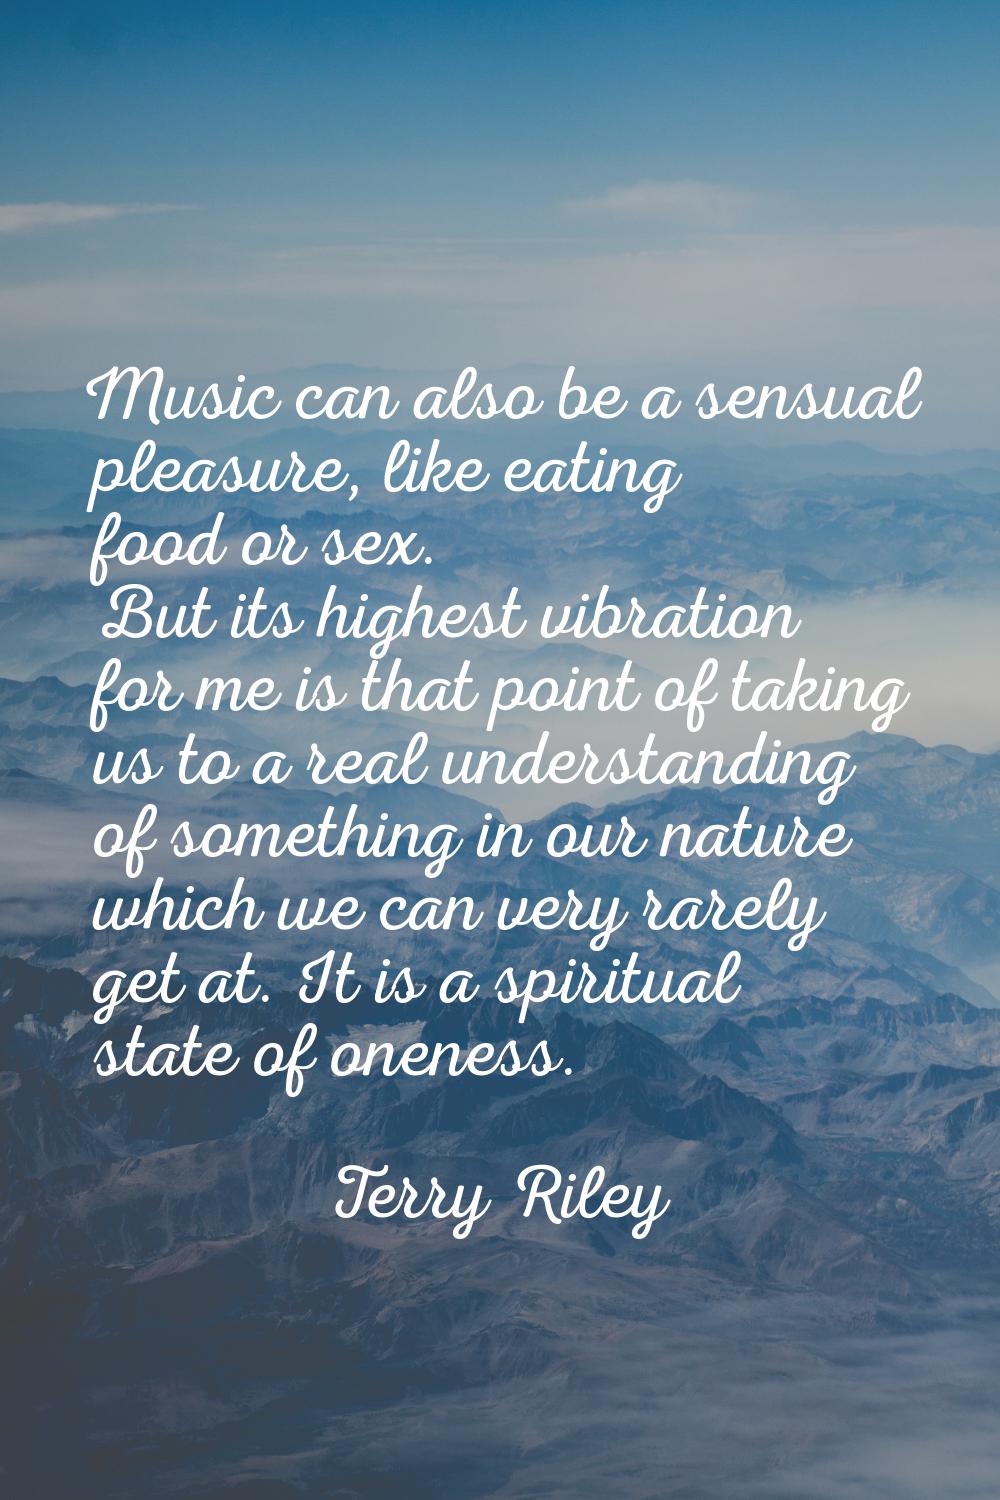 Music can also be a sensual pleasure, like eating food or sex. But its highest vibration for me is 